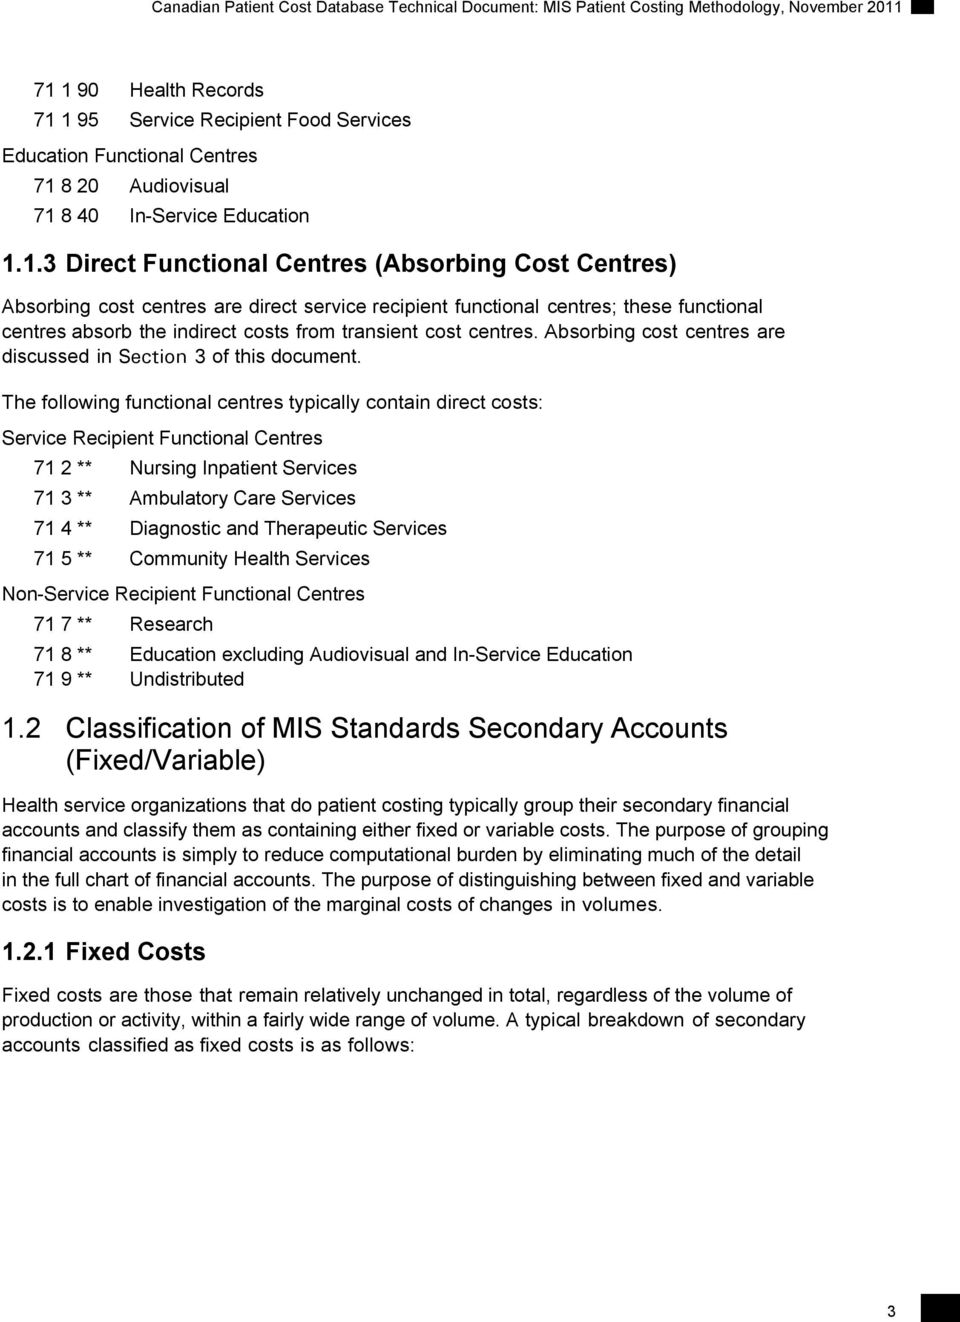 Absorbing cost centres are discussed in Section 3 of this document.